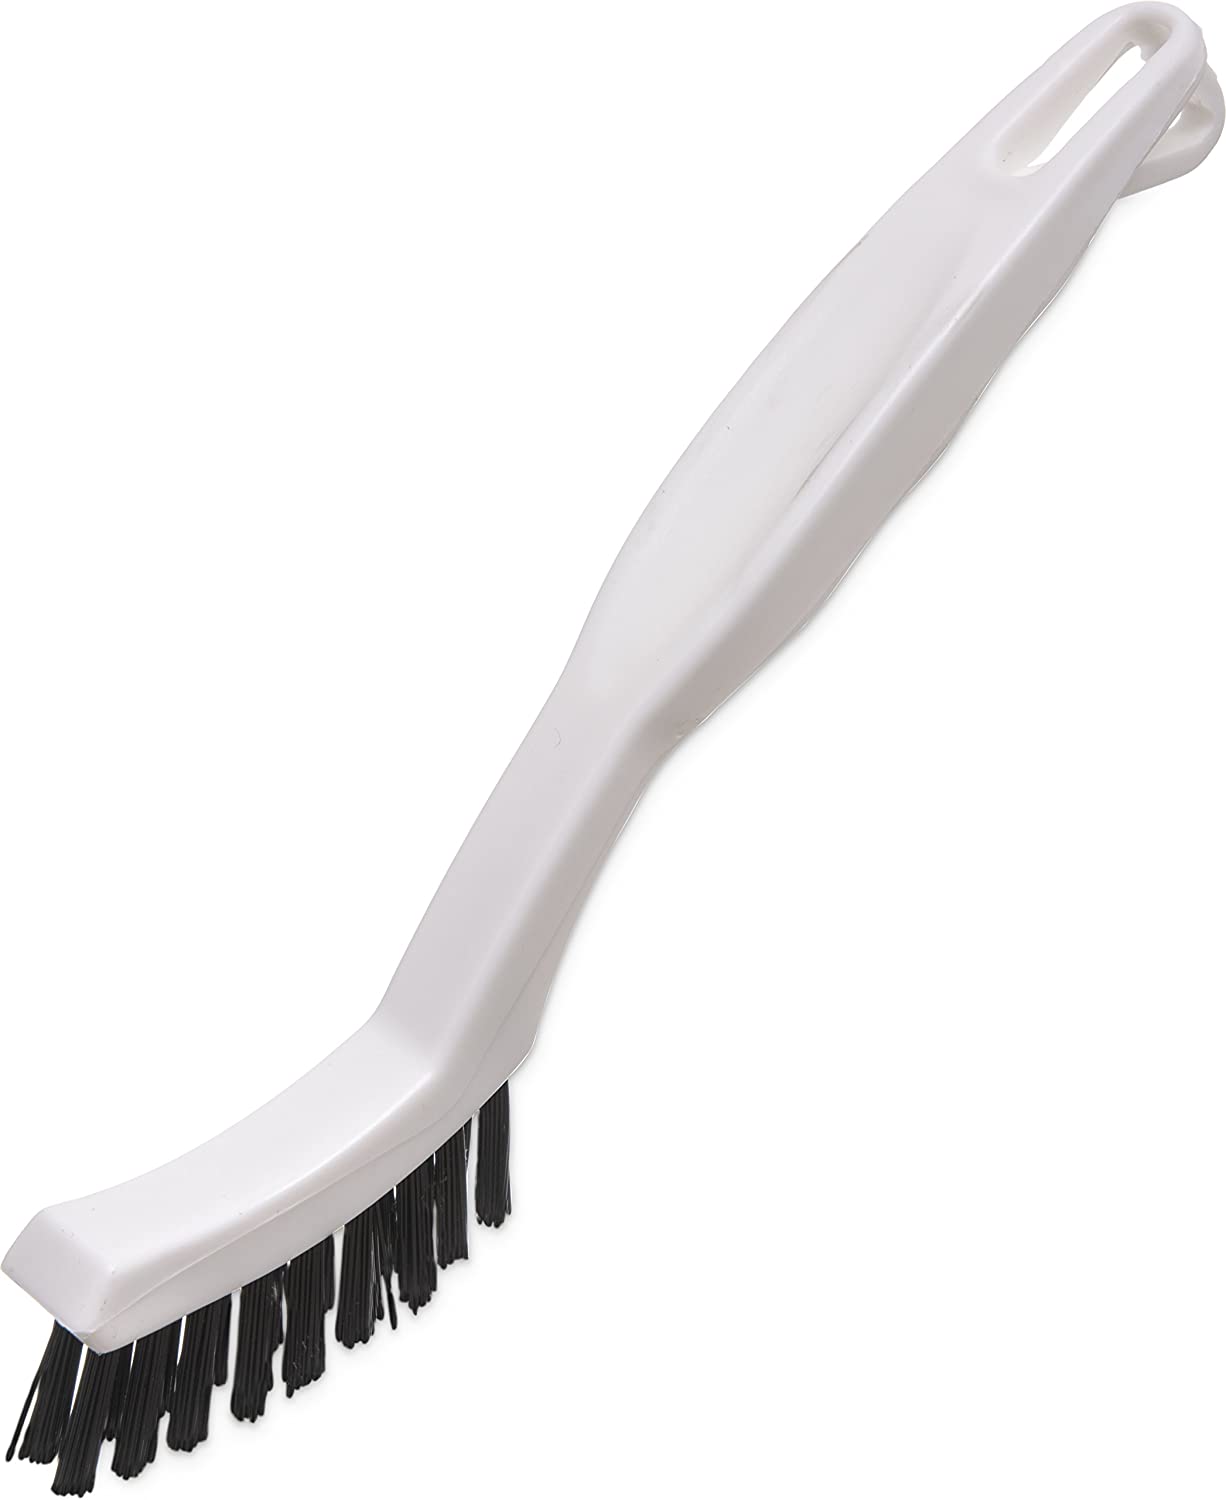 Carlisle Flo-Pac Commercial Cleaning Brush